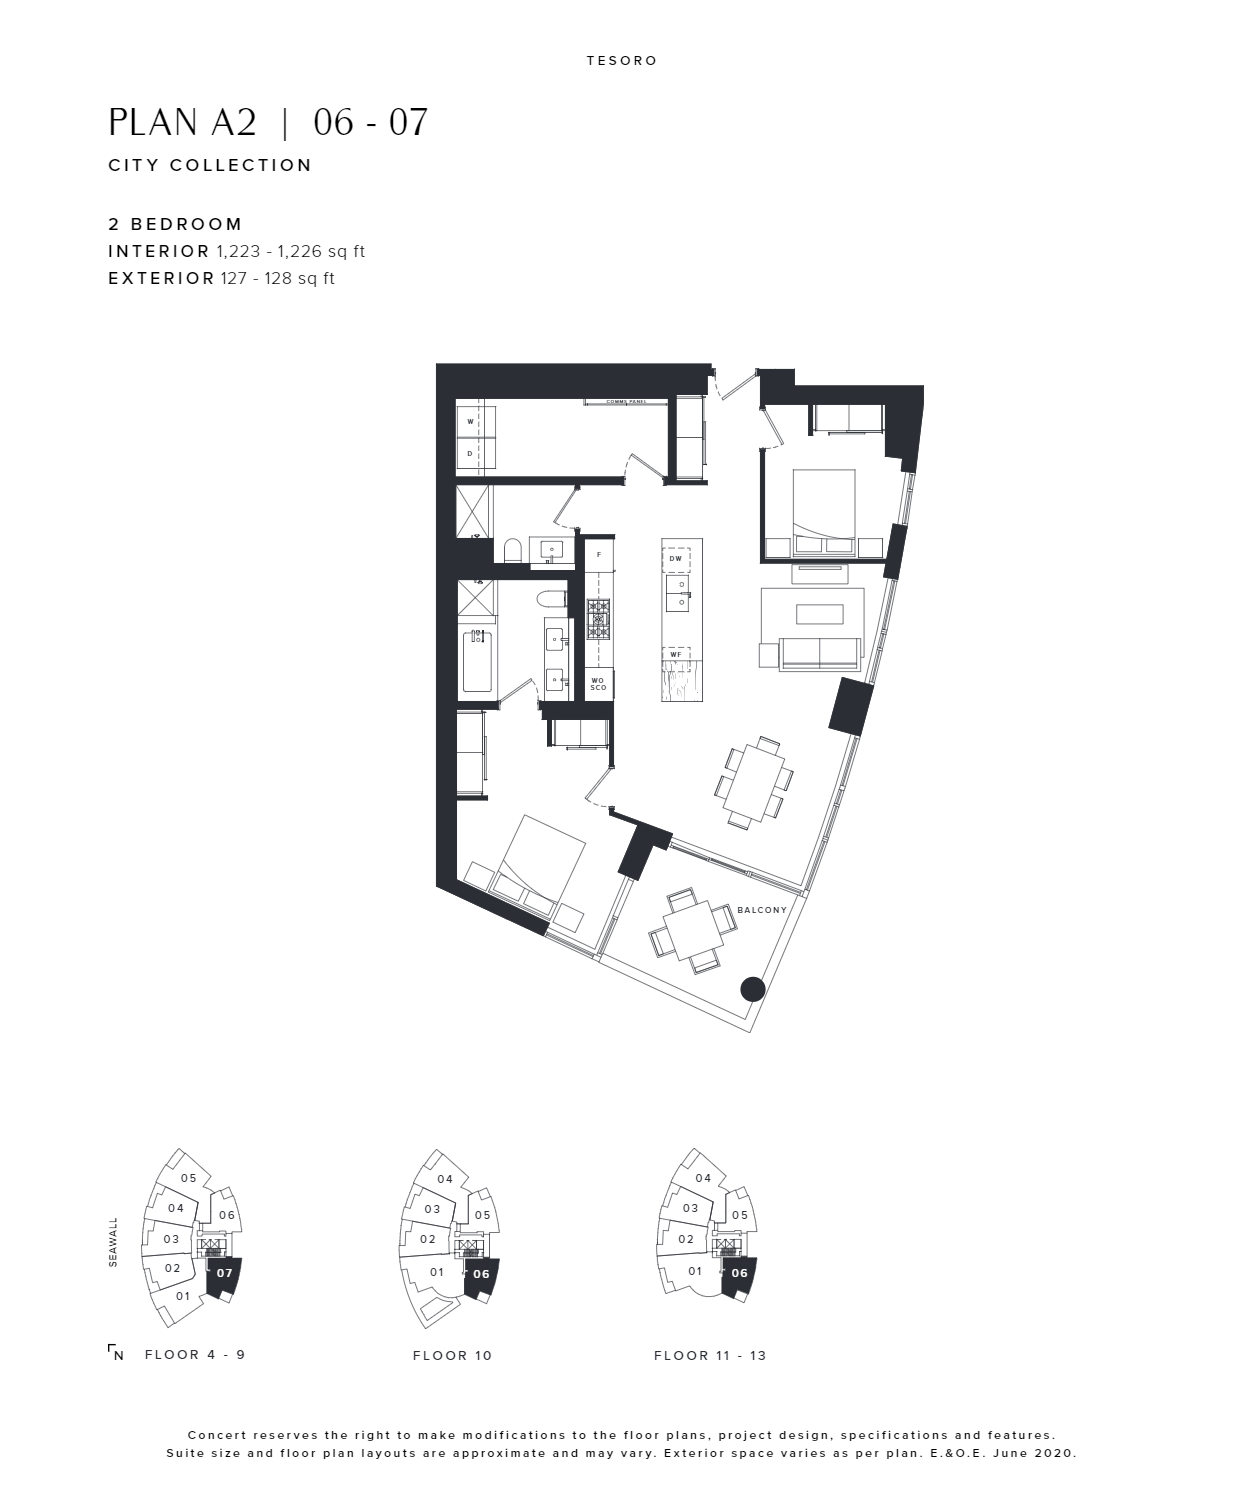 A2 | 06-07 Floor Plan of Tesoro Condos with undefined beds